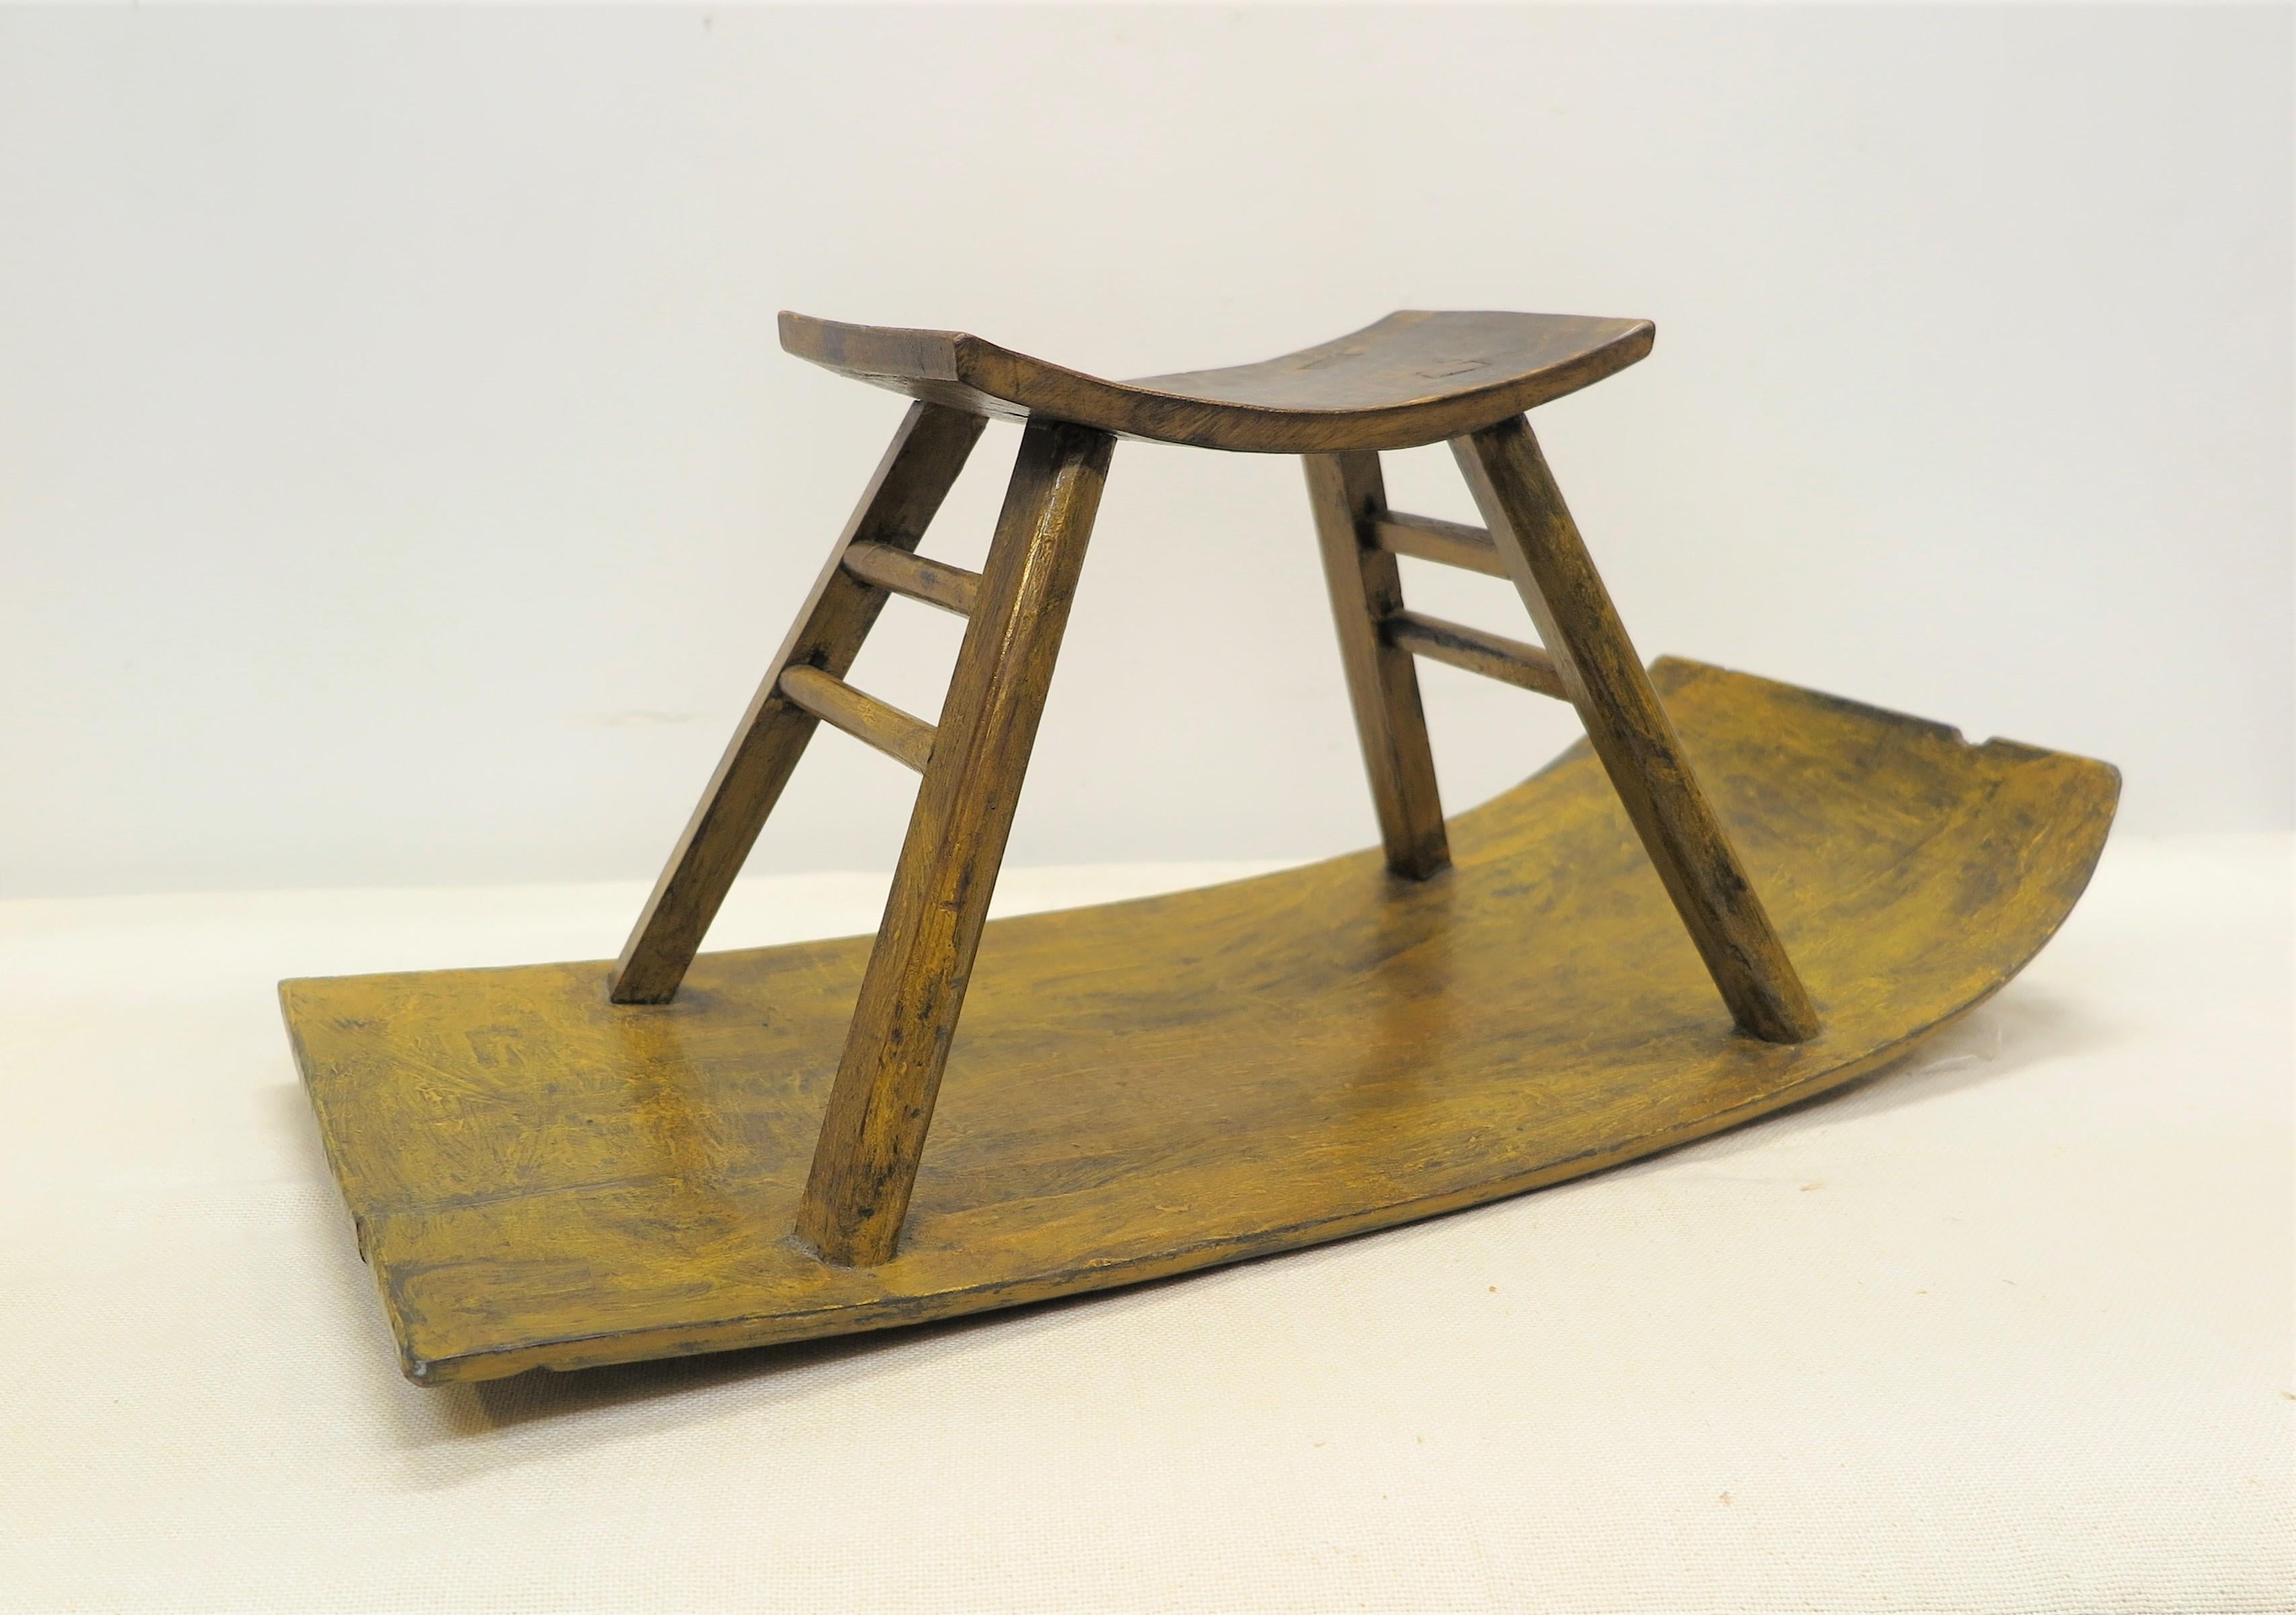 Early 20th Century Antique Children's Toy Sled